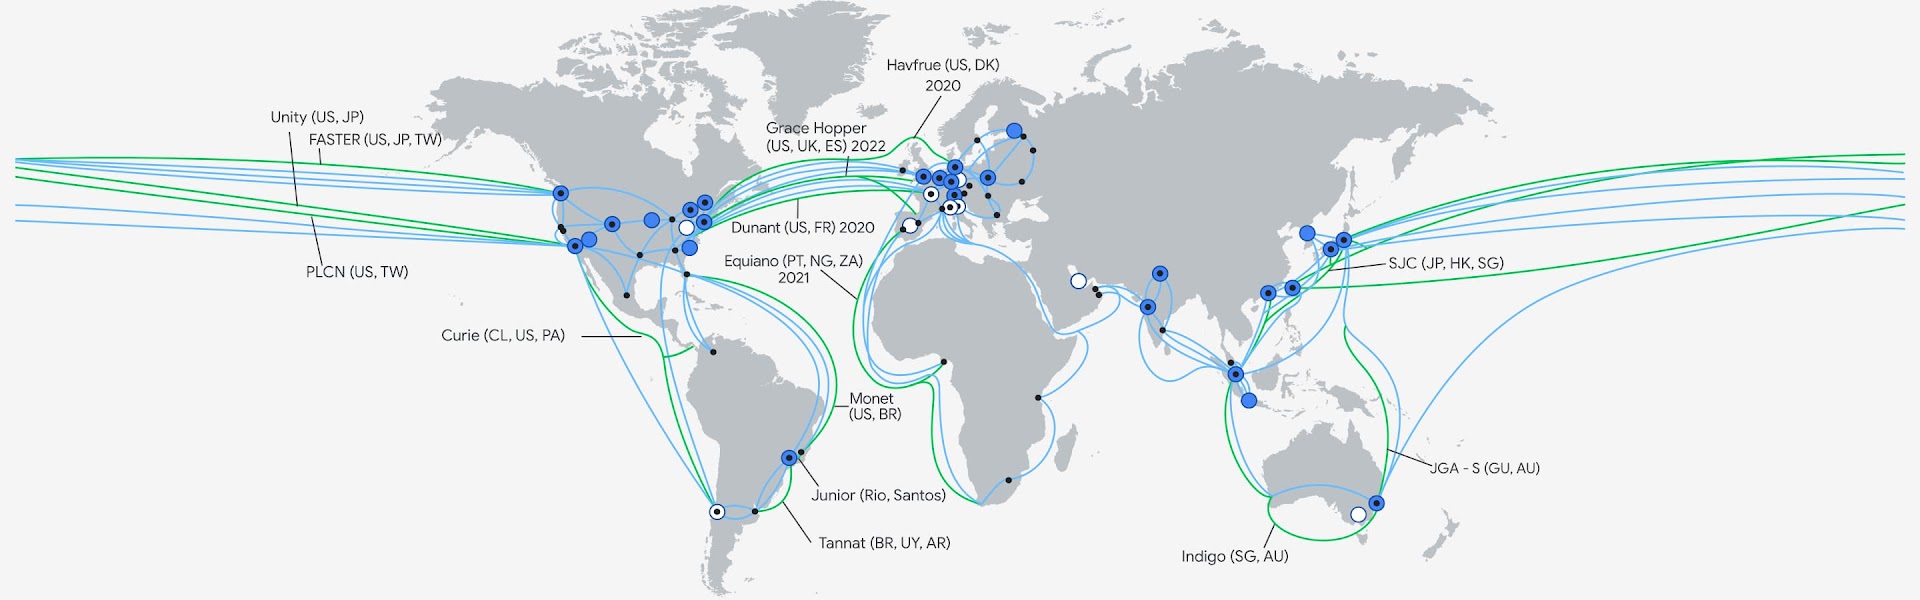 Map of Google Cloud Infrastructure